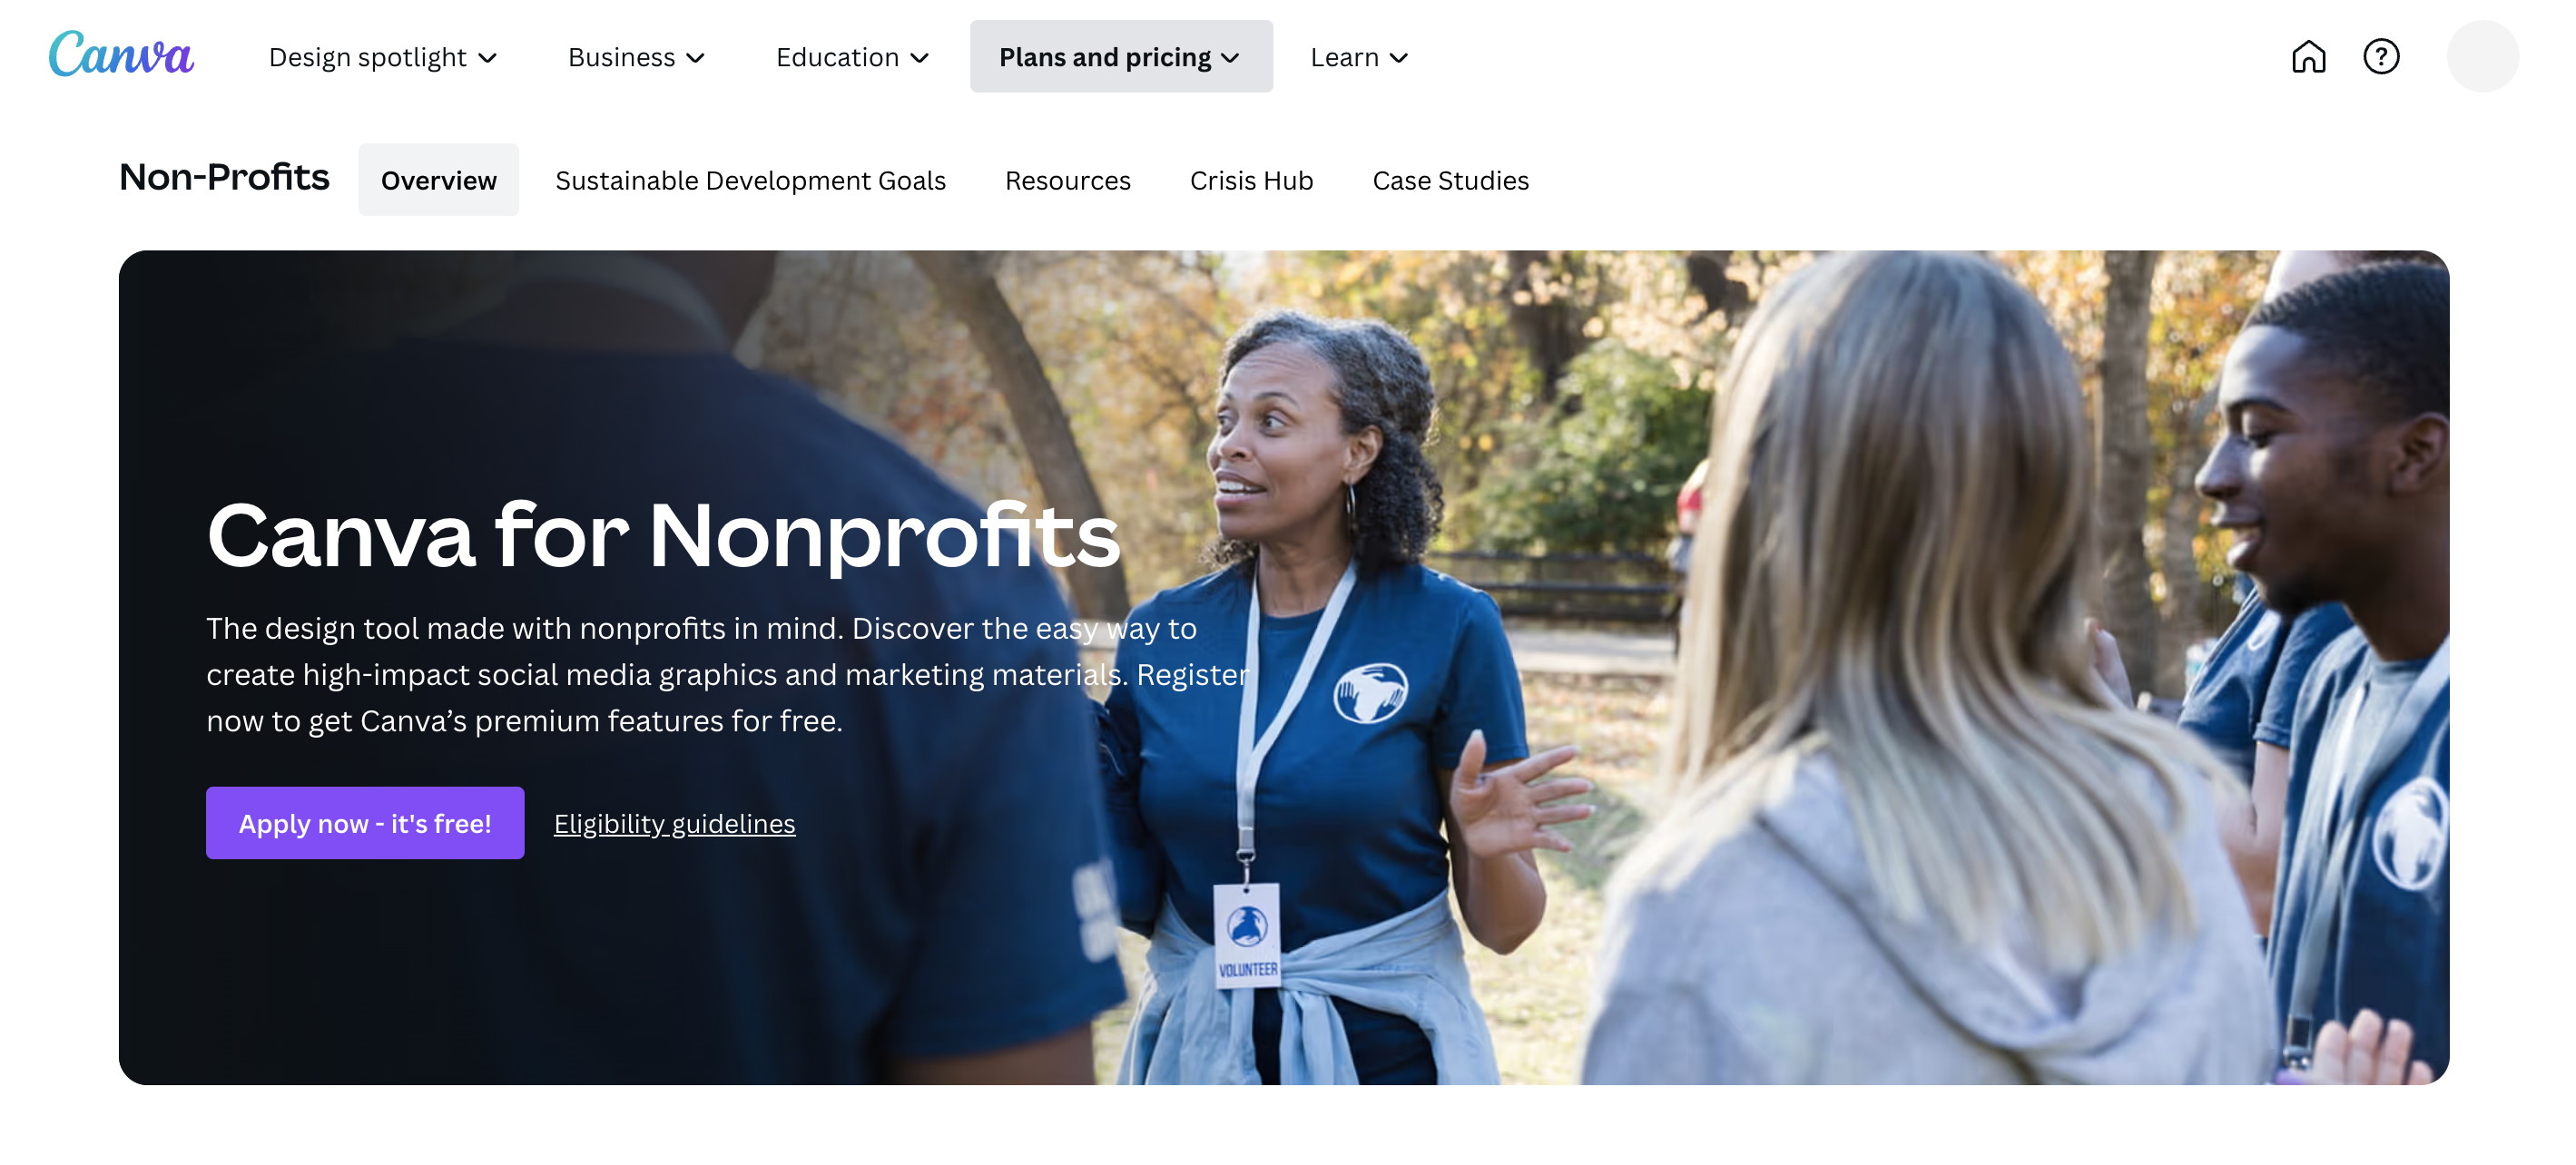 Screenshot showing the Canva for Nonprofits pricing page on Canva.